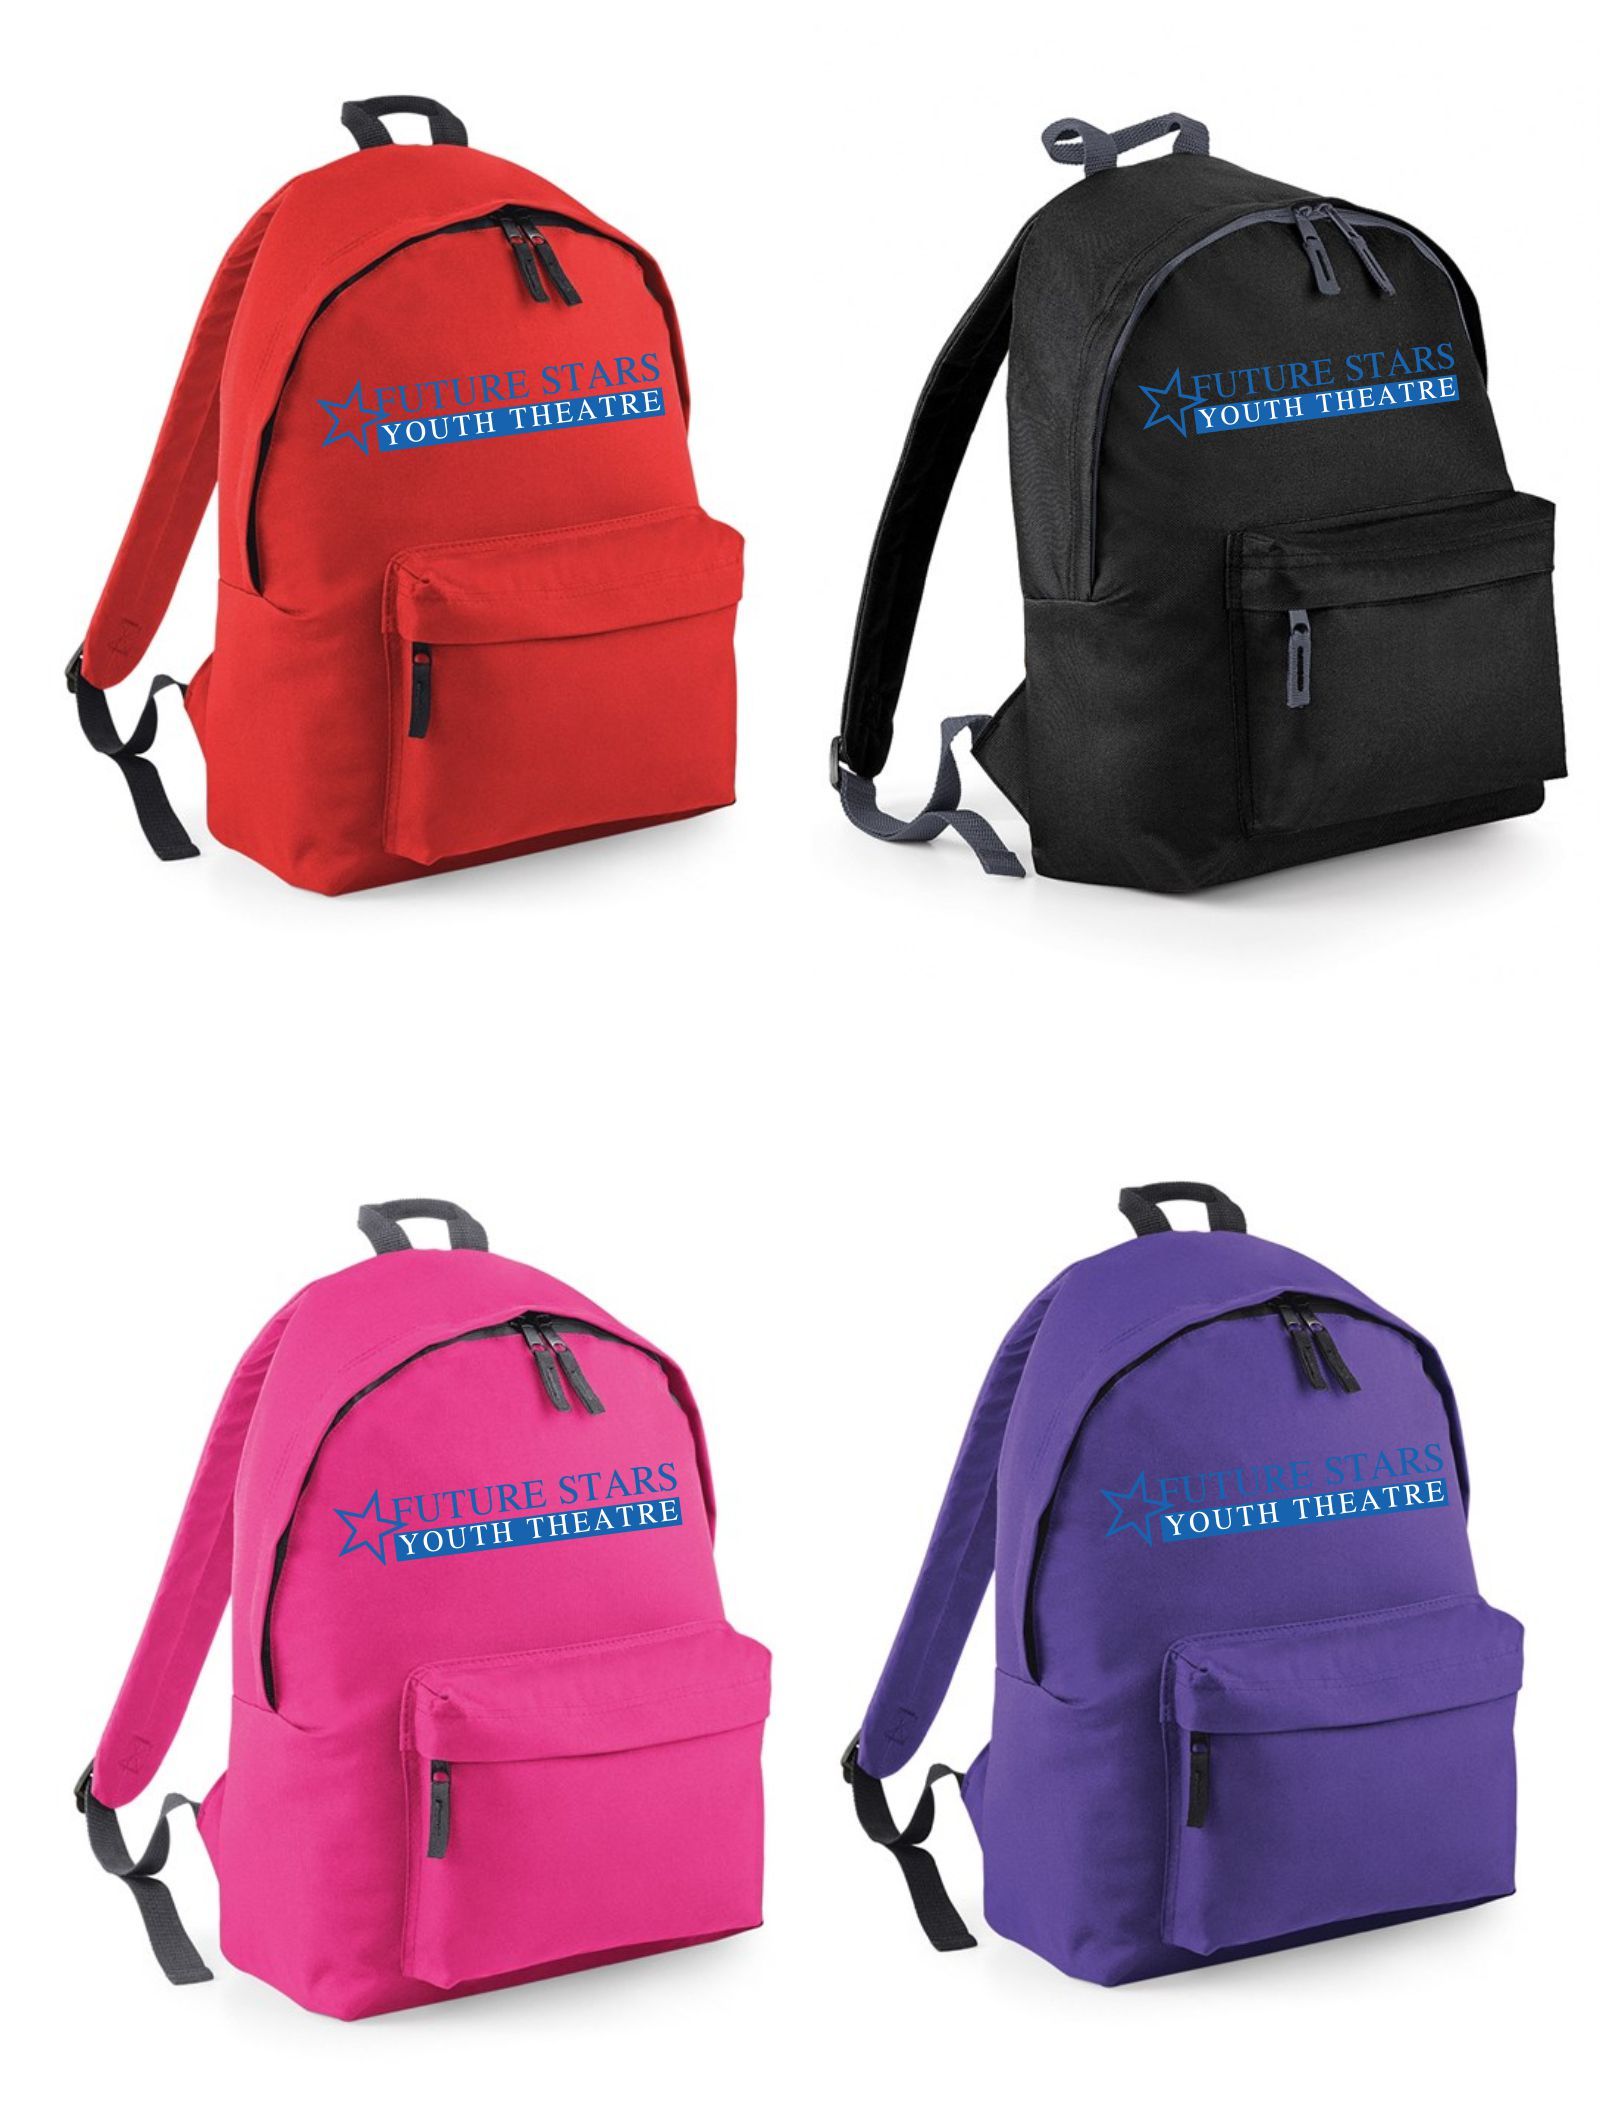 Future Stars Youth Theatre – Backpack 